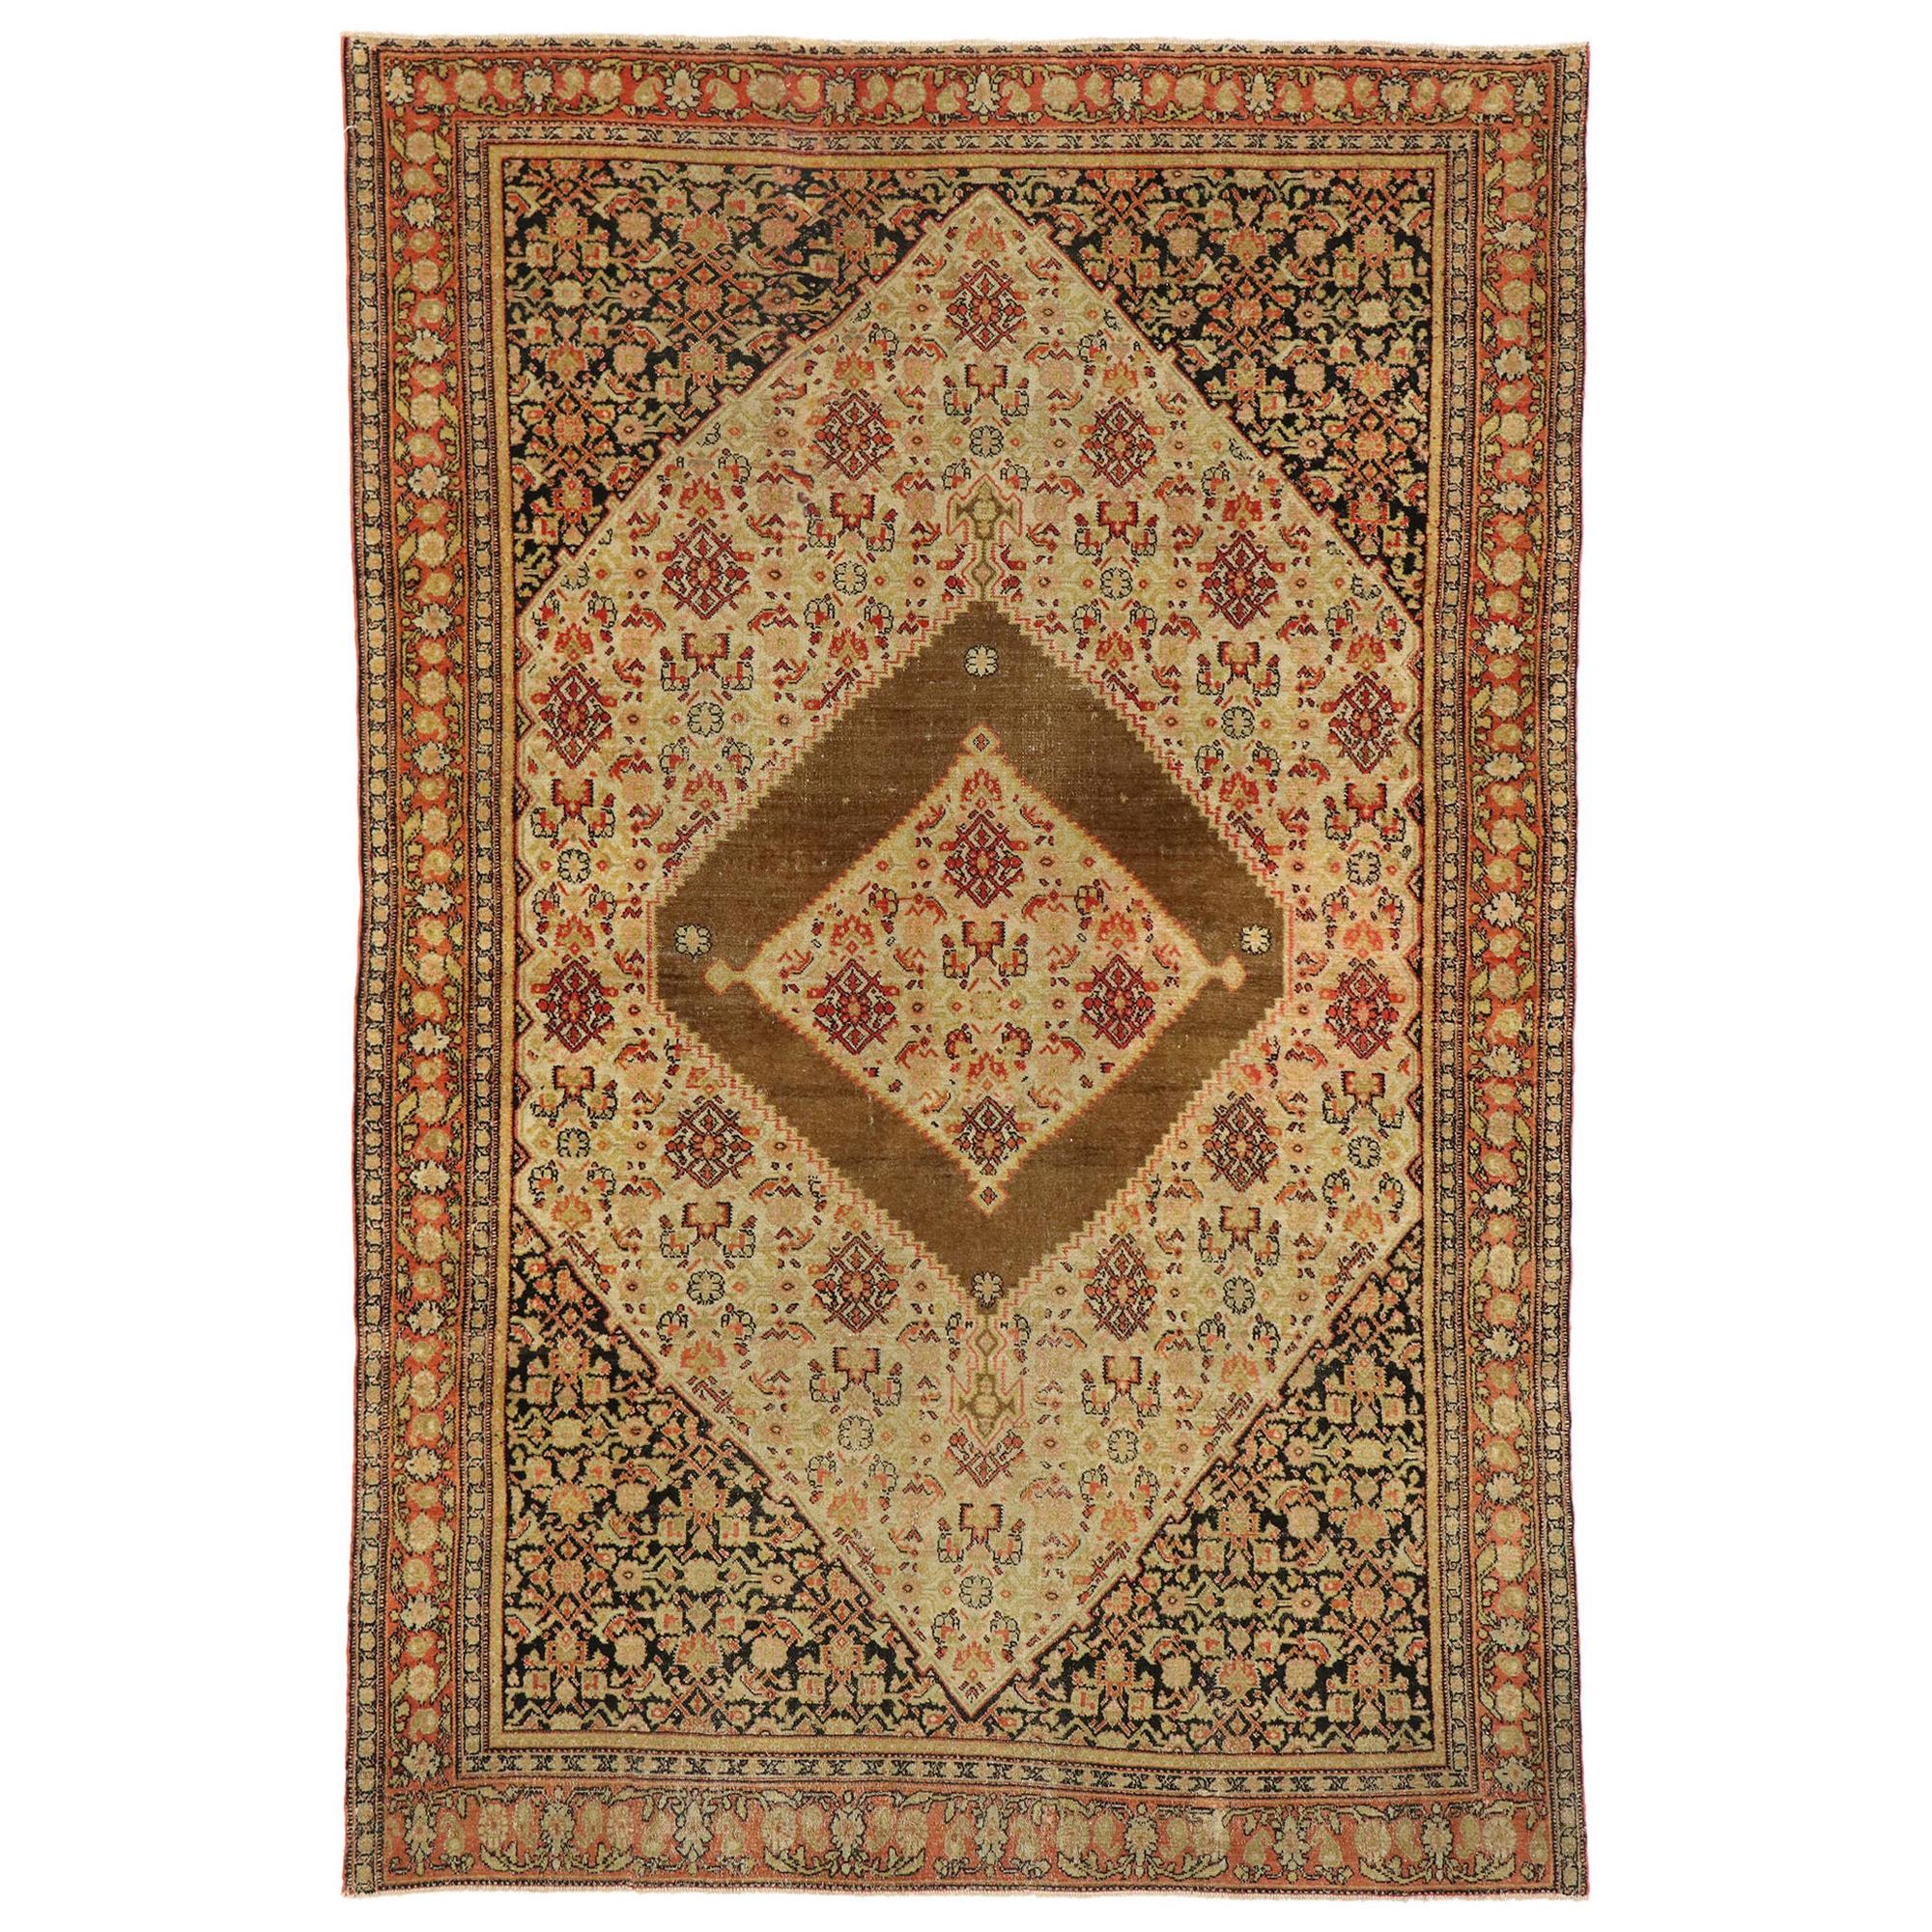 Distressed Antique Persian Senneh Rug with Rustic Mid-Century Modern Style For Sale